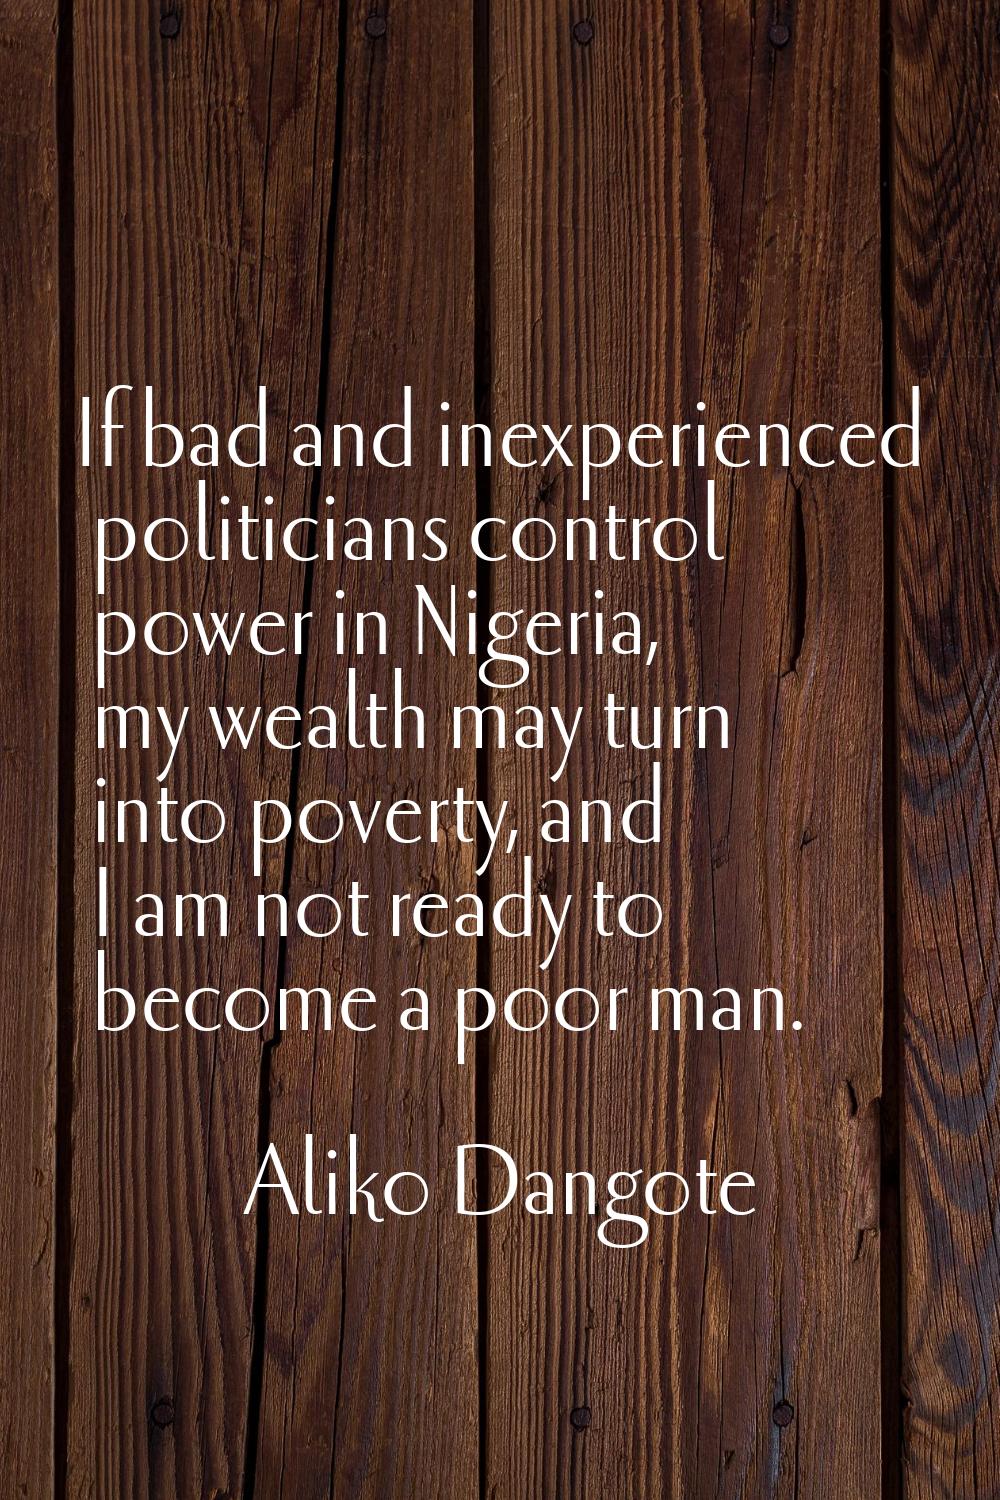 If bad and inexperienced politicians control power in Nigeria, my wealth may turn into poverty, and